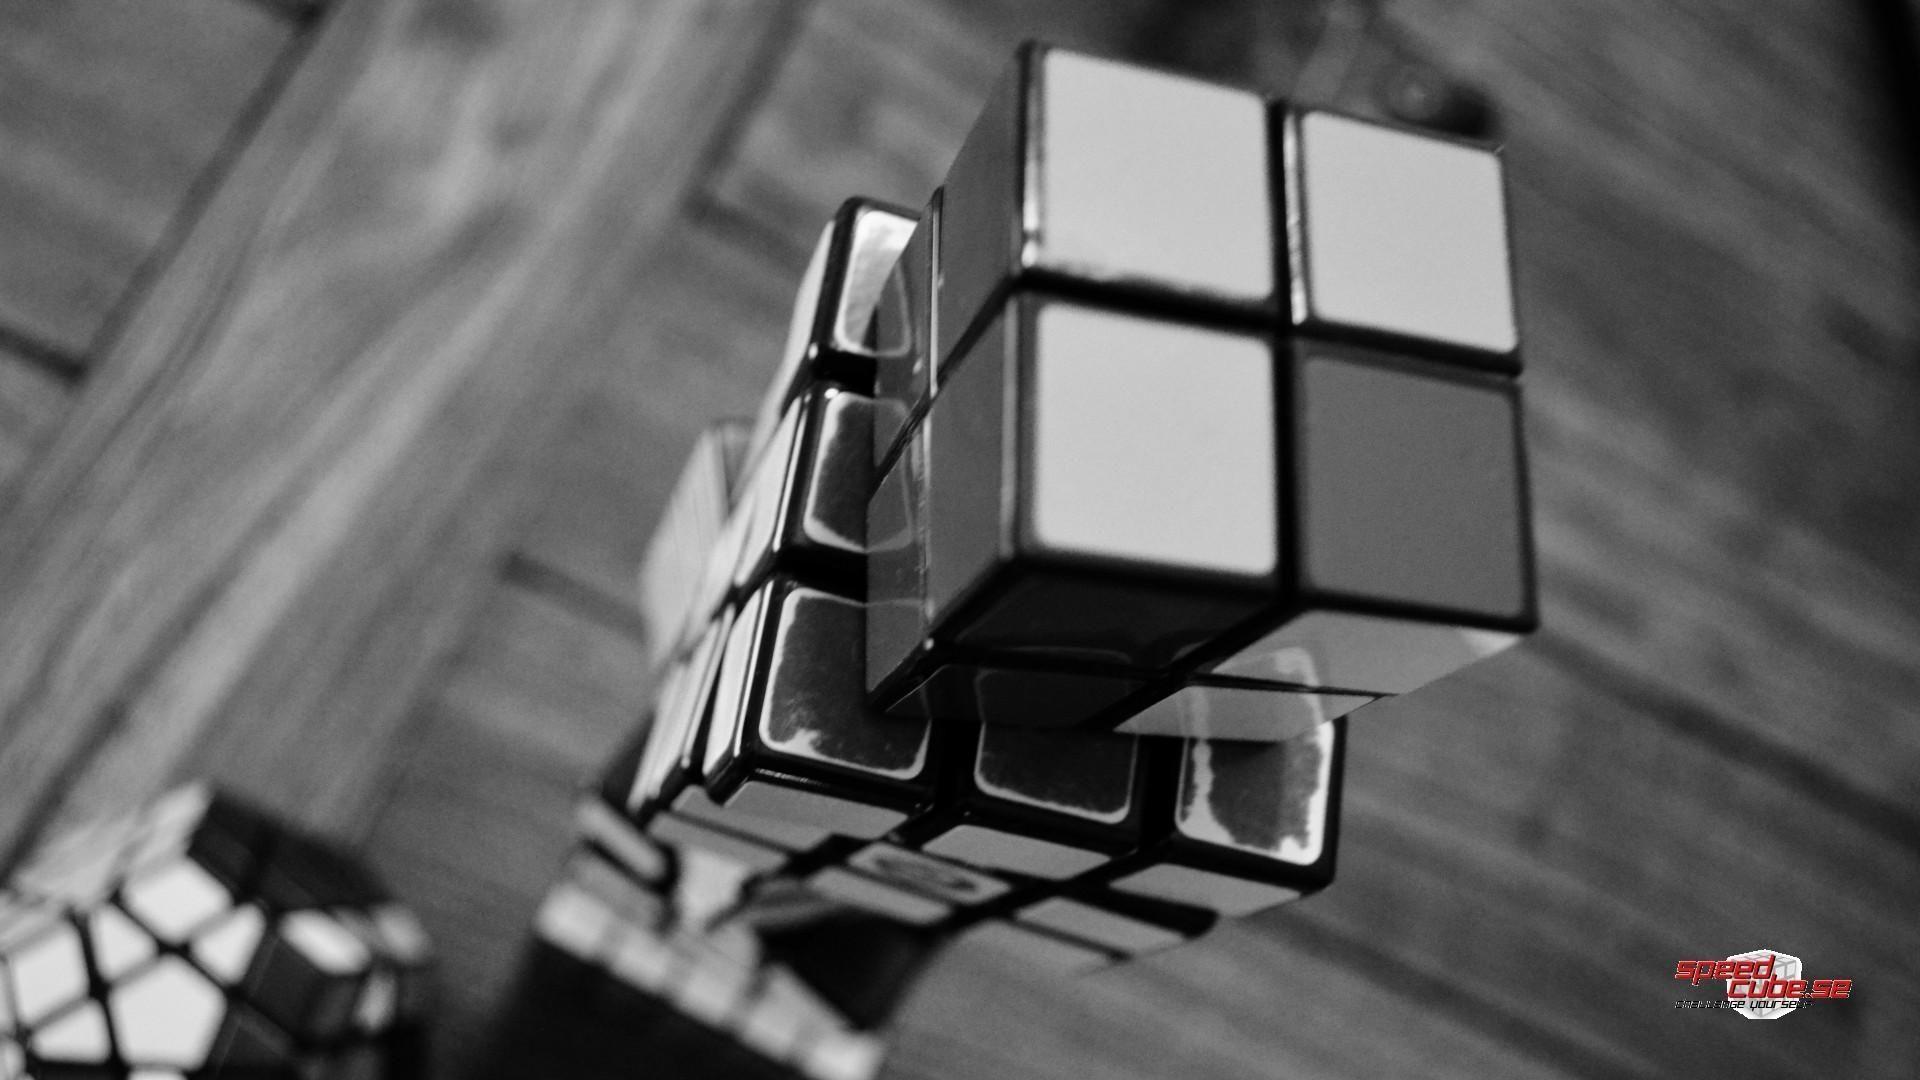 2x2 3x3 5x5 rubiks cube cubes wallpapers